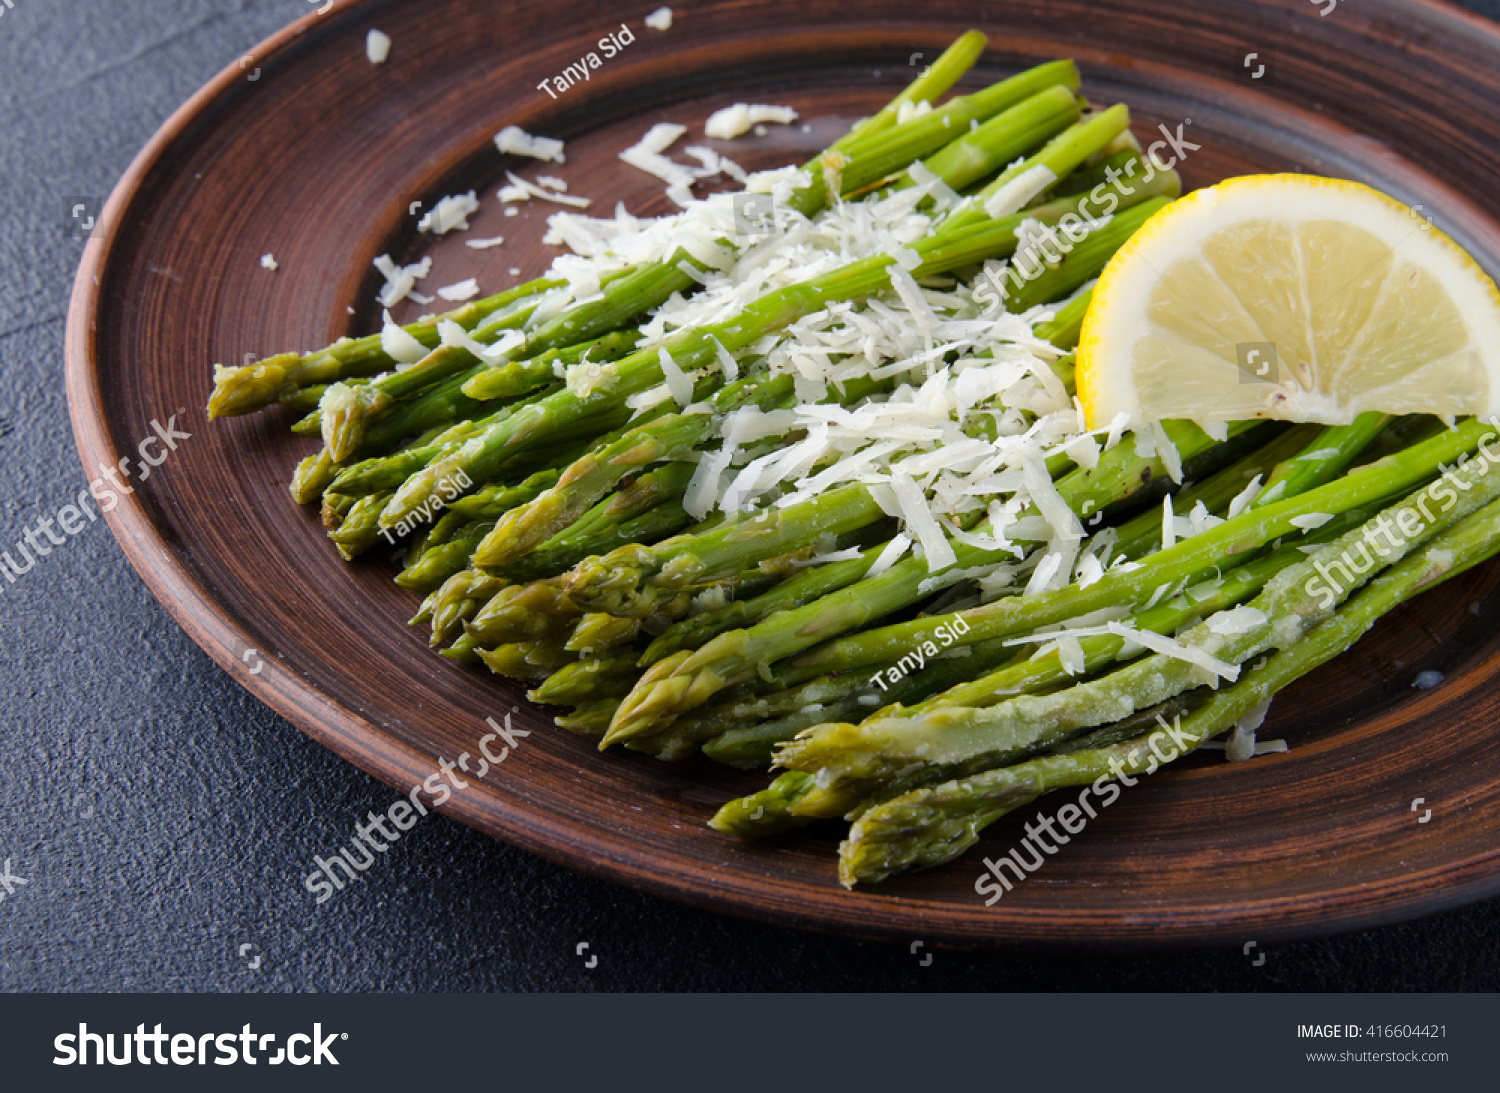 Asparagus with lemons and cheese. Top view #416604421